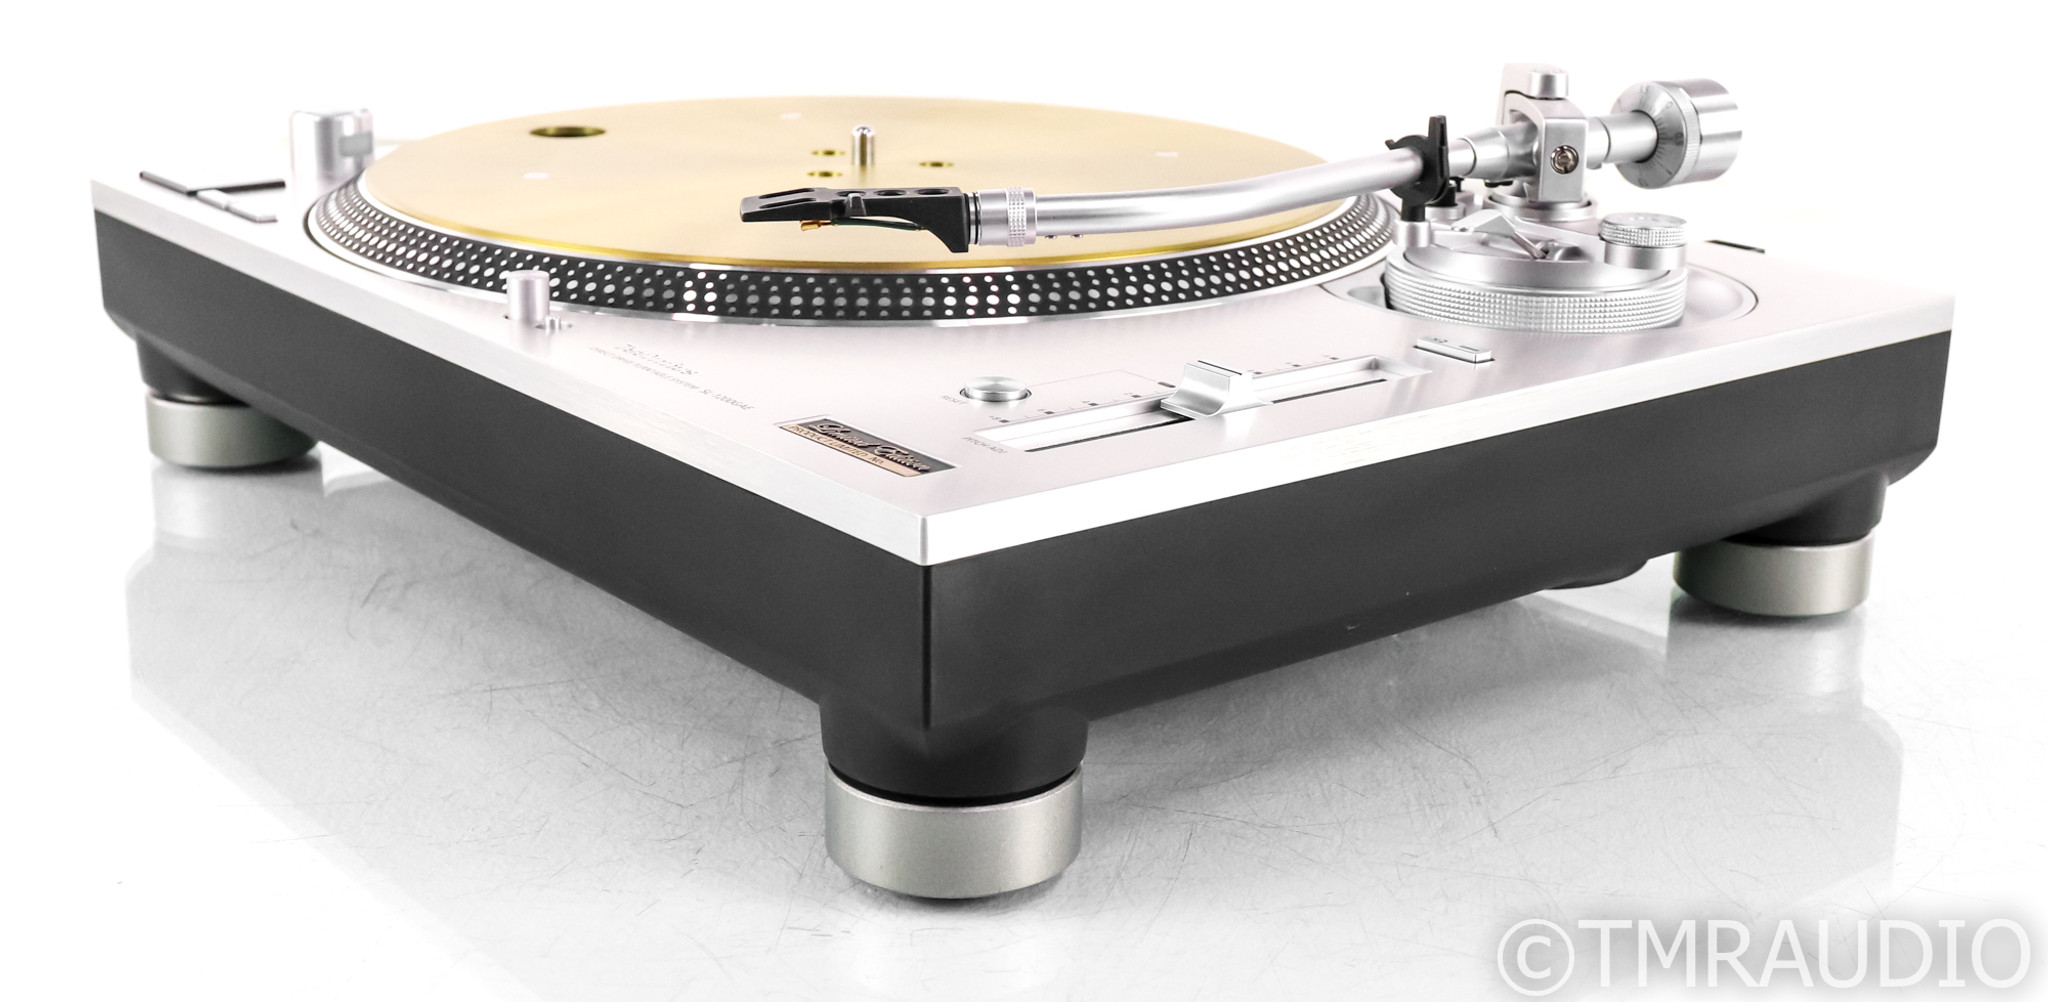 Technics' limited-edition 50th anniversary turntable comes in